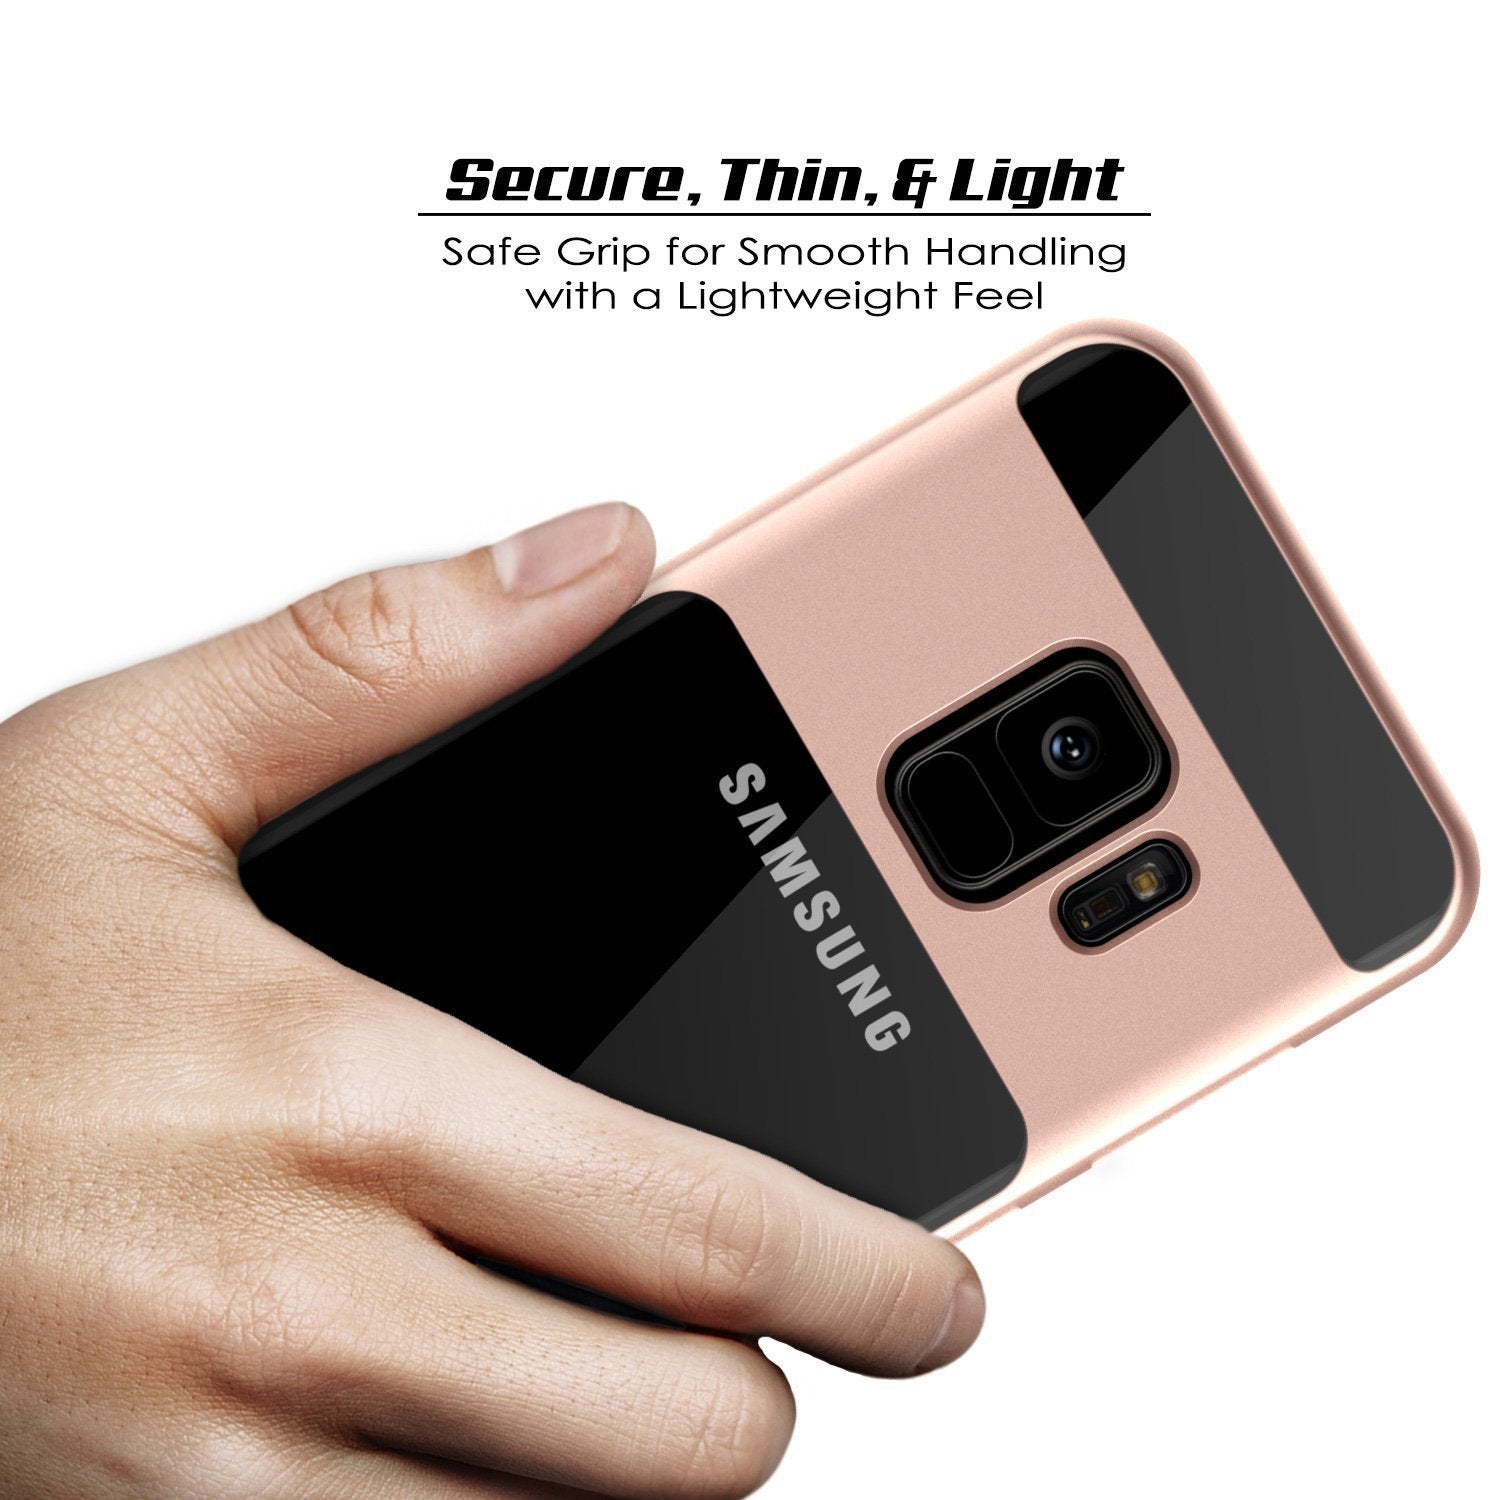 Galaxy S9 Case, PUNKcase [LUCID 3.0 Series] [Slim Fit] [Clear Back] Armor Cover w/ Integrated Kickstand, Anti-Shock System & PUNKSHIELD Screen Protector for Samsung Galaxy S9 [Rose Gold]